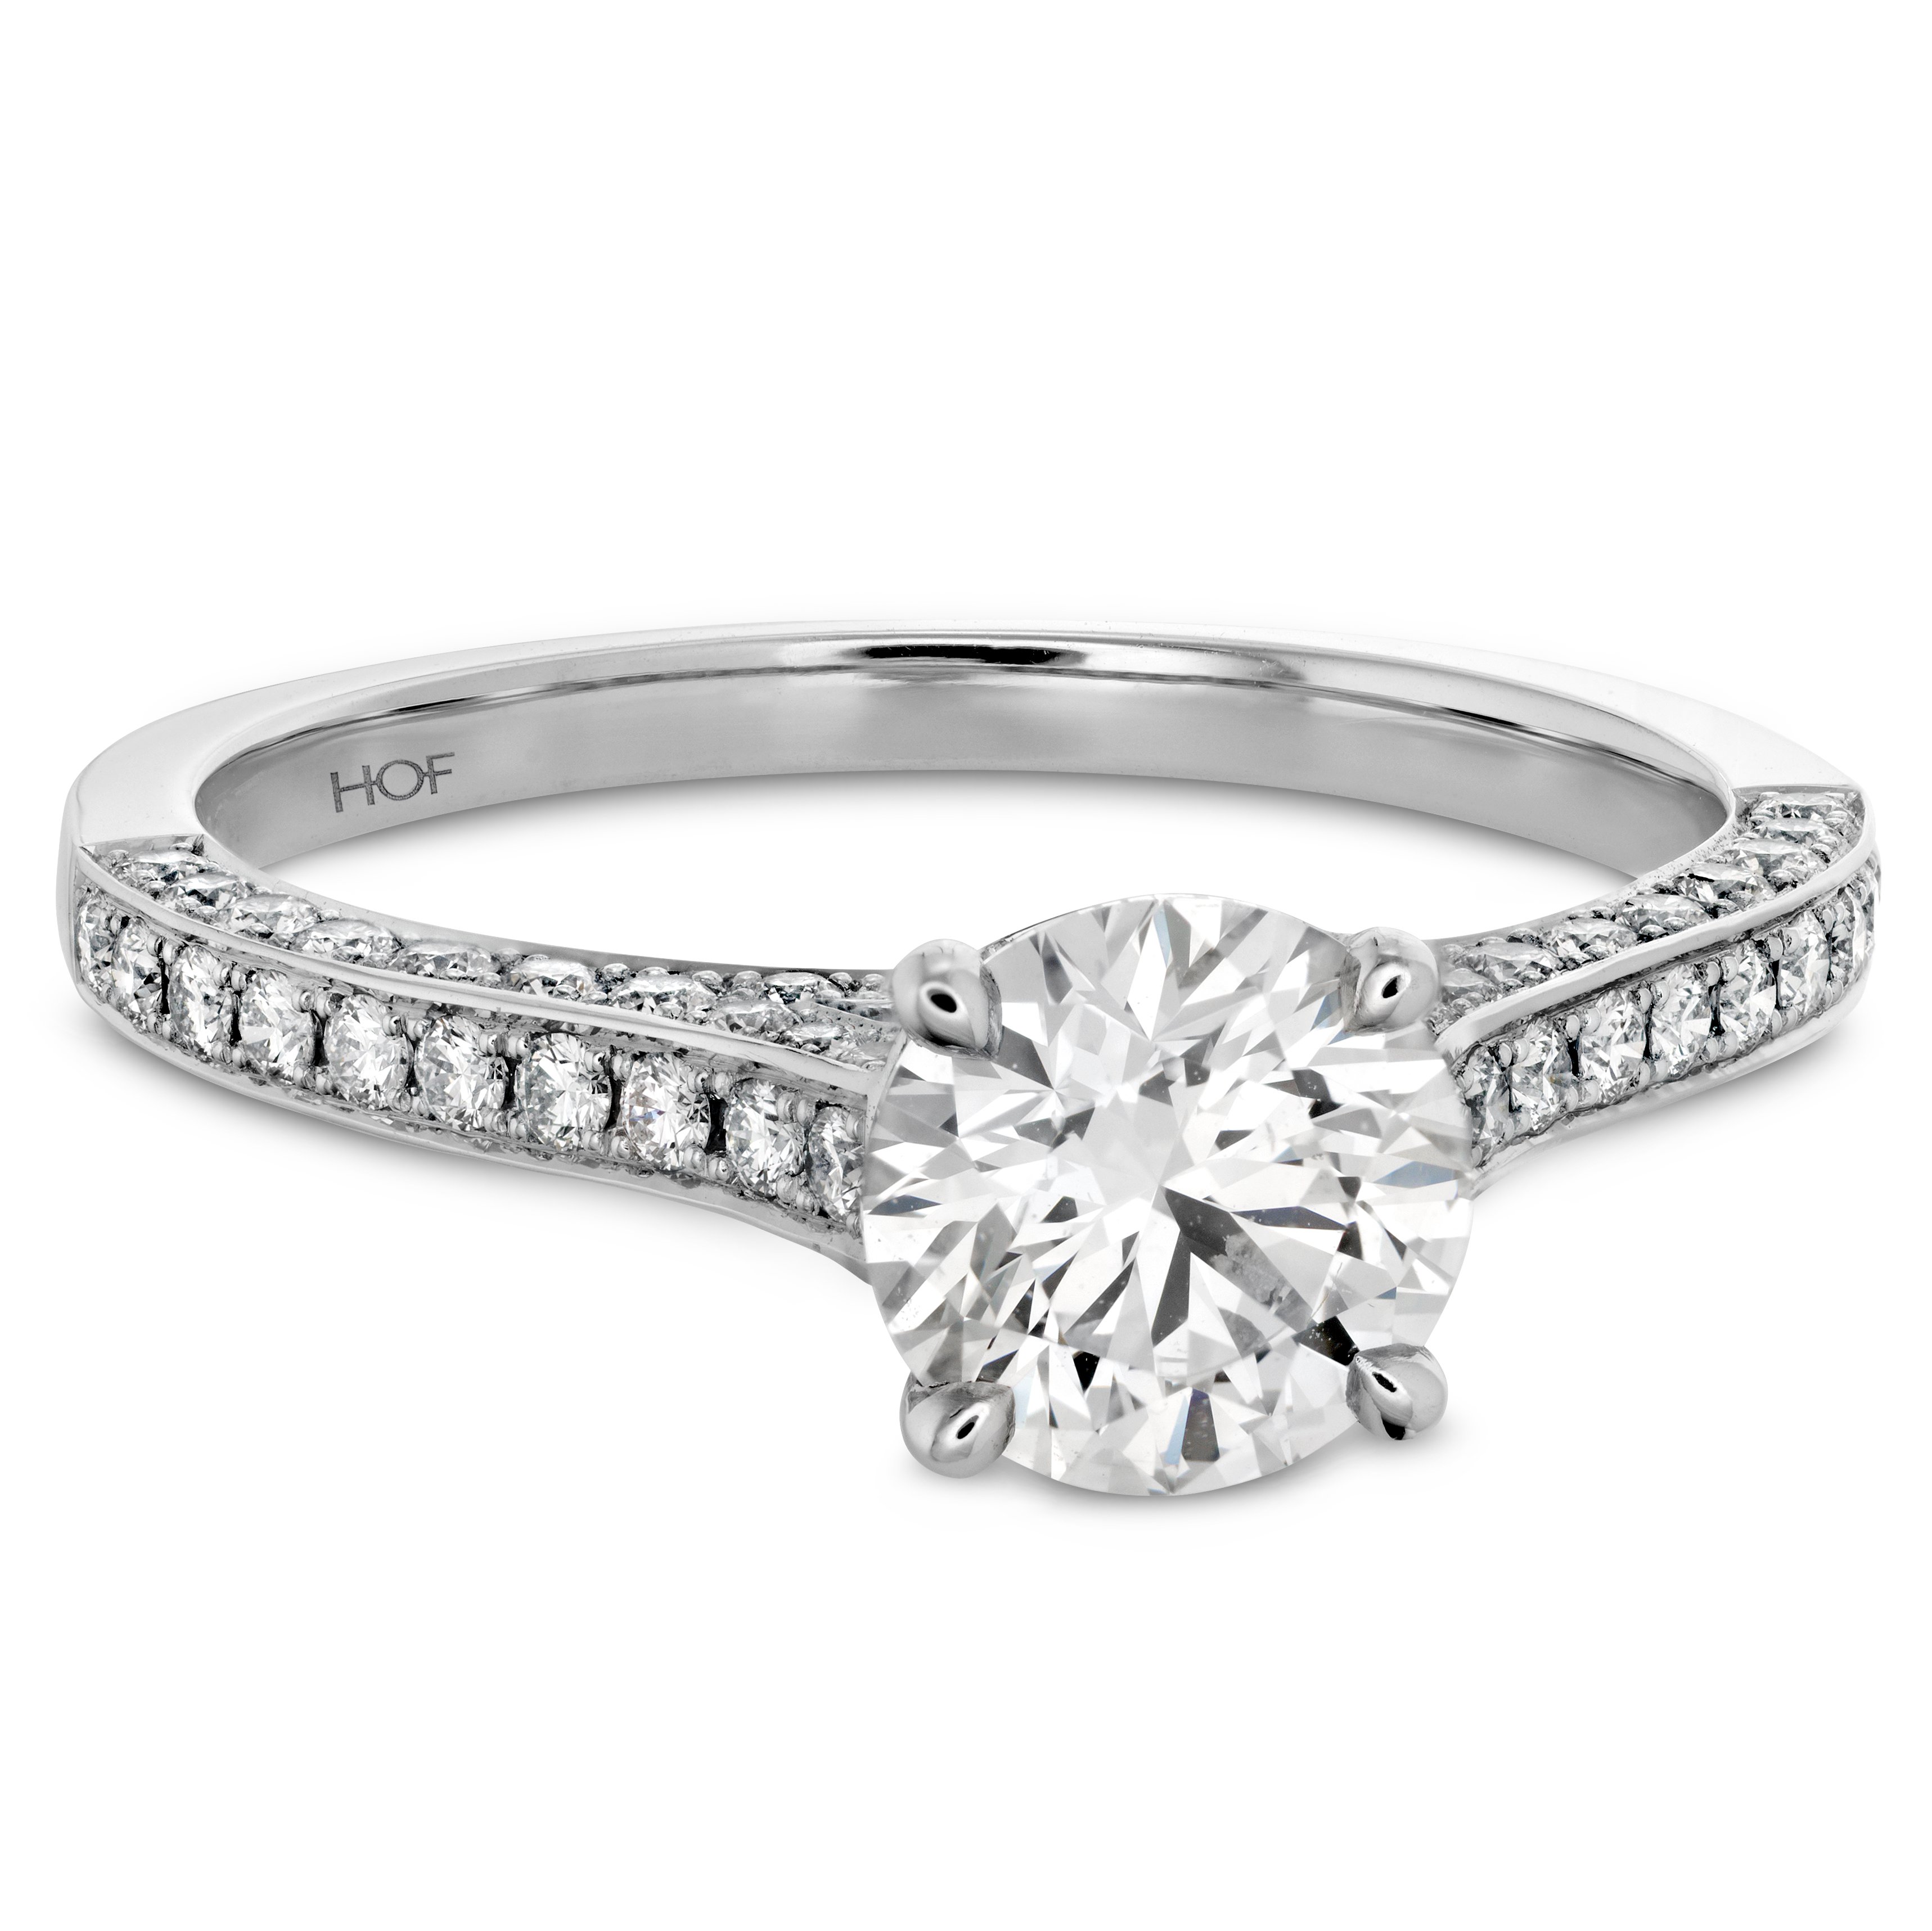 https://www.arthursjewelers.com/content/images/thumbs/Original/Illustrious Ring with Intensive Band_2-173929520.jpg